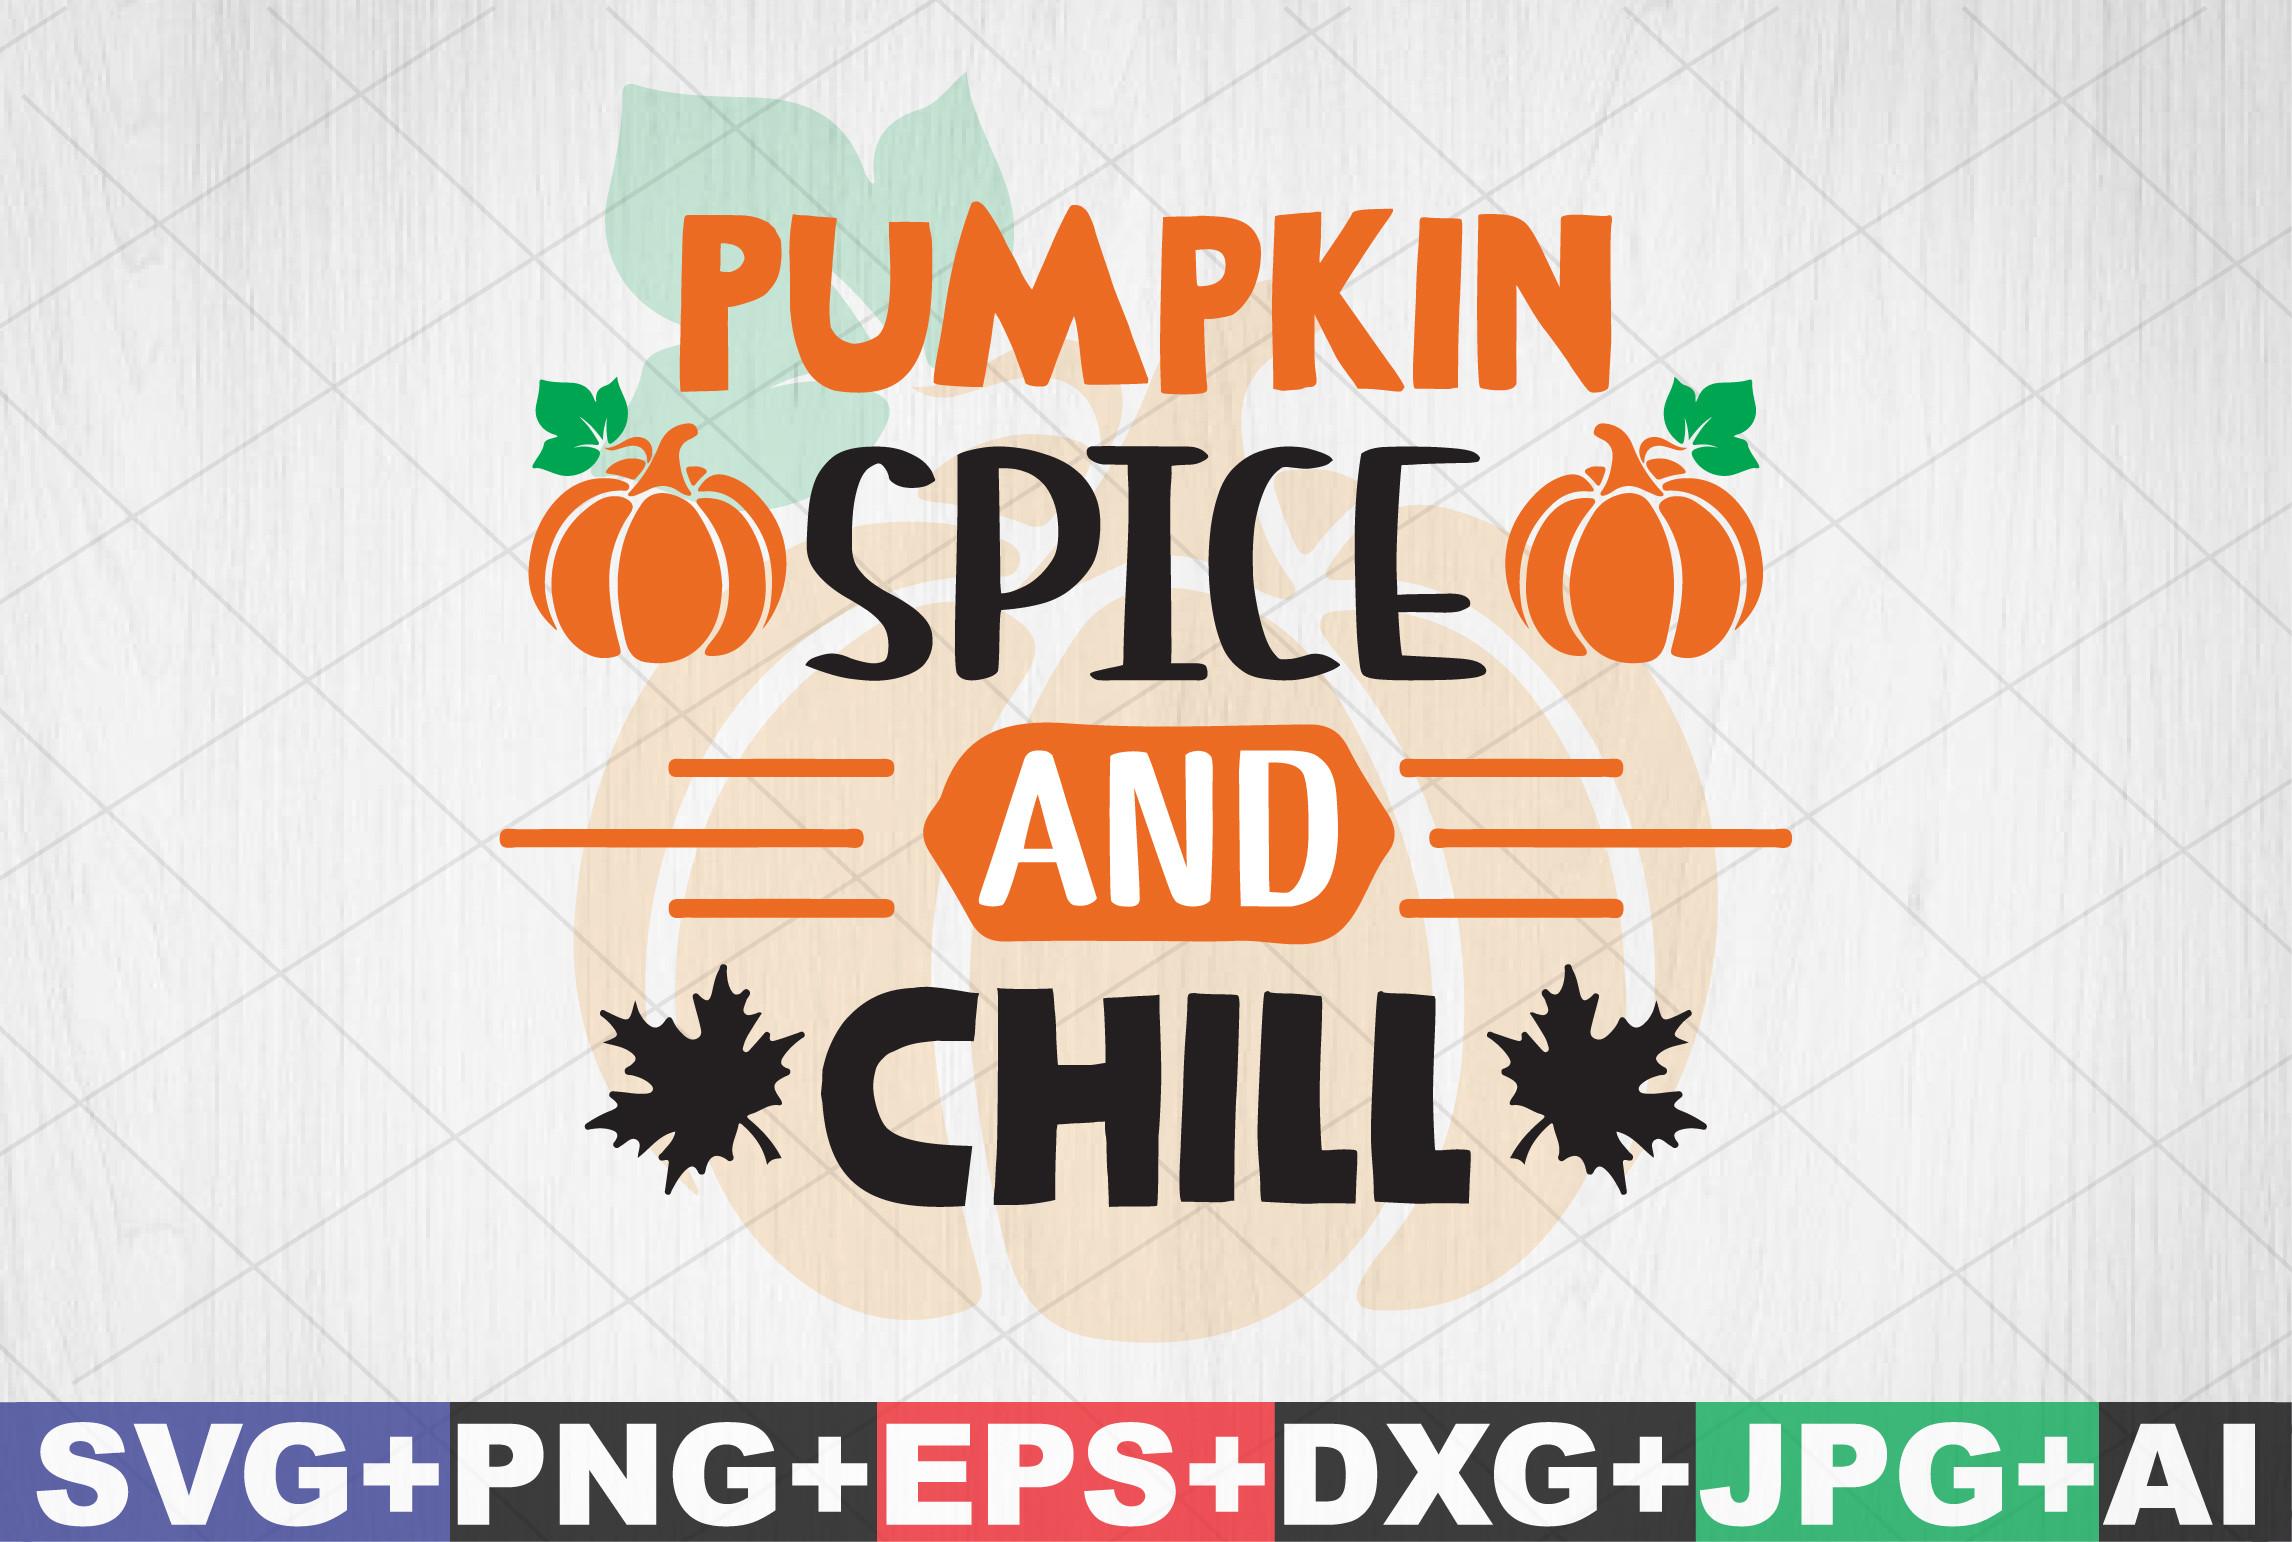 Pumpkin Spice and Chill